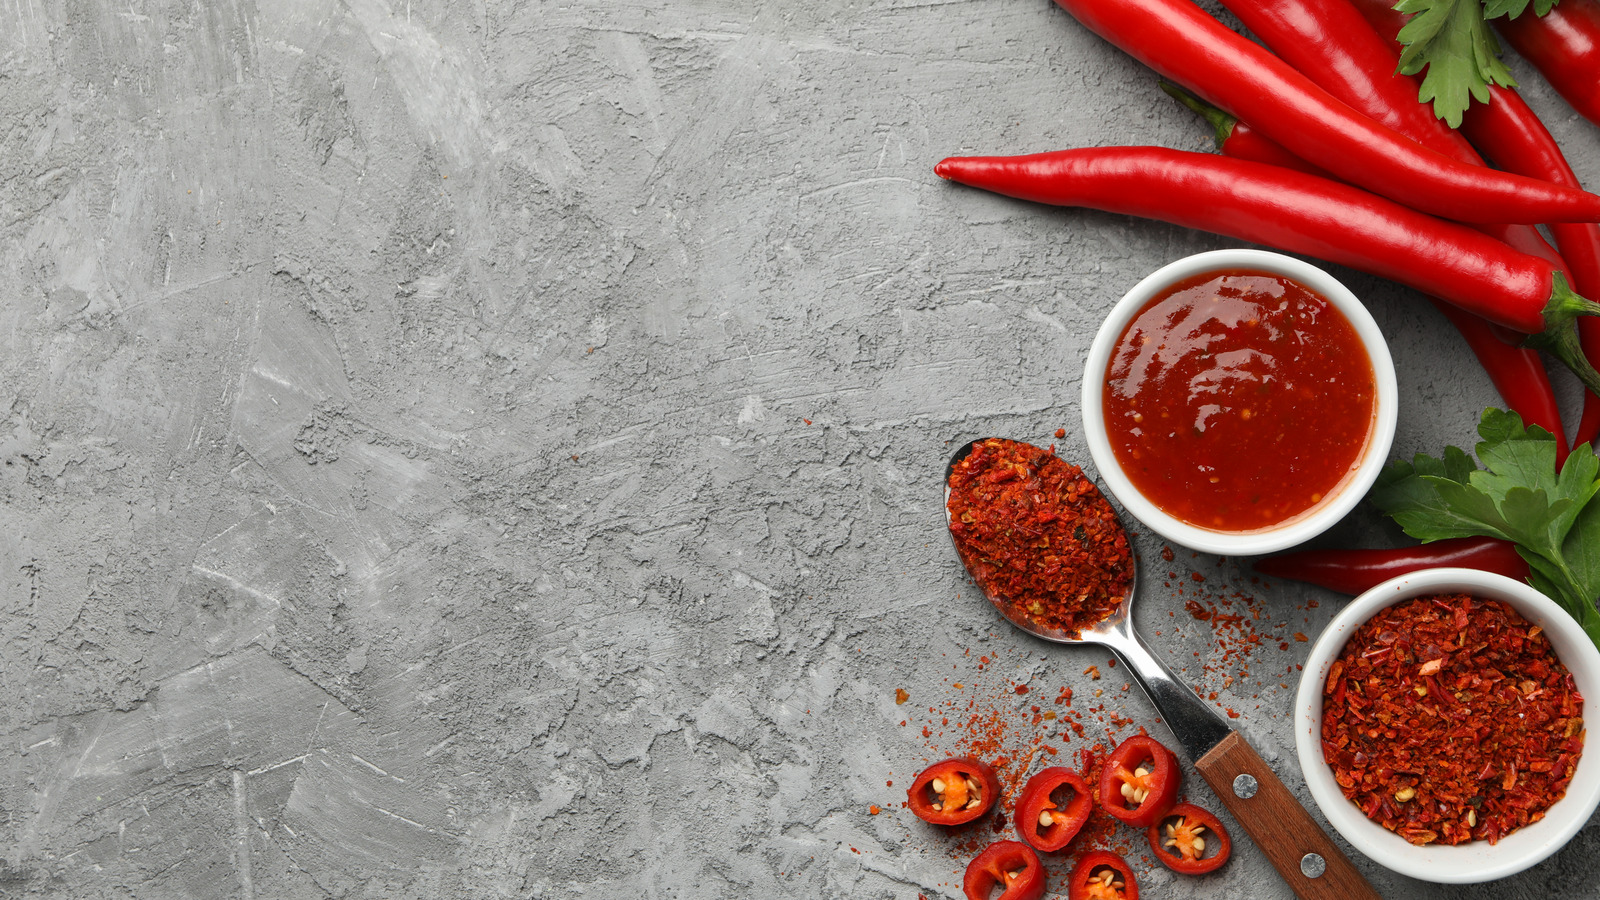 What Happens To Your Body When You Eat Hot Sauce Every Day